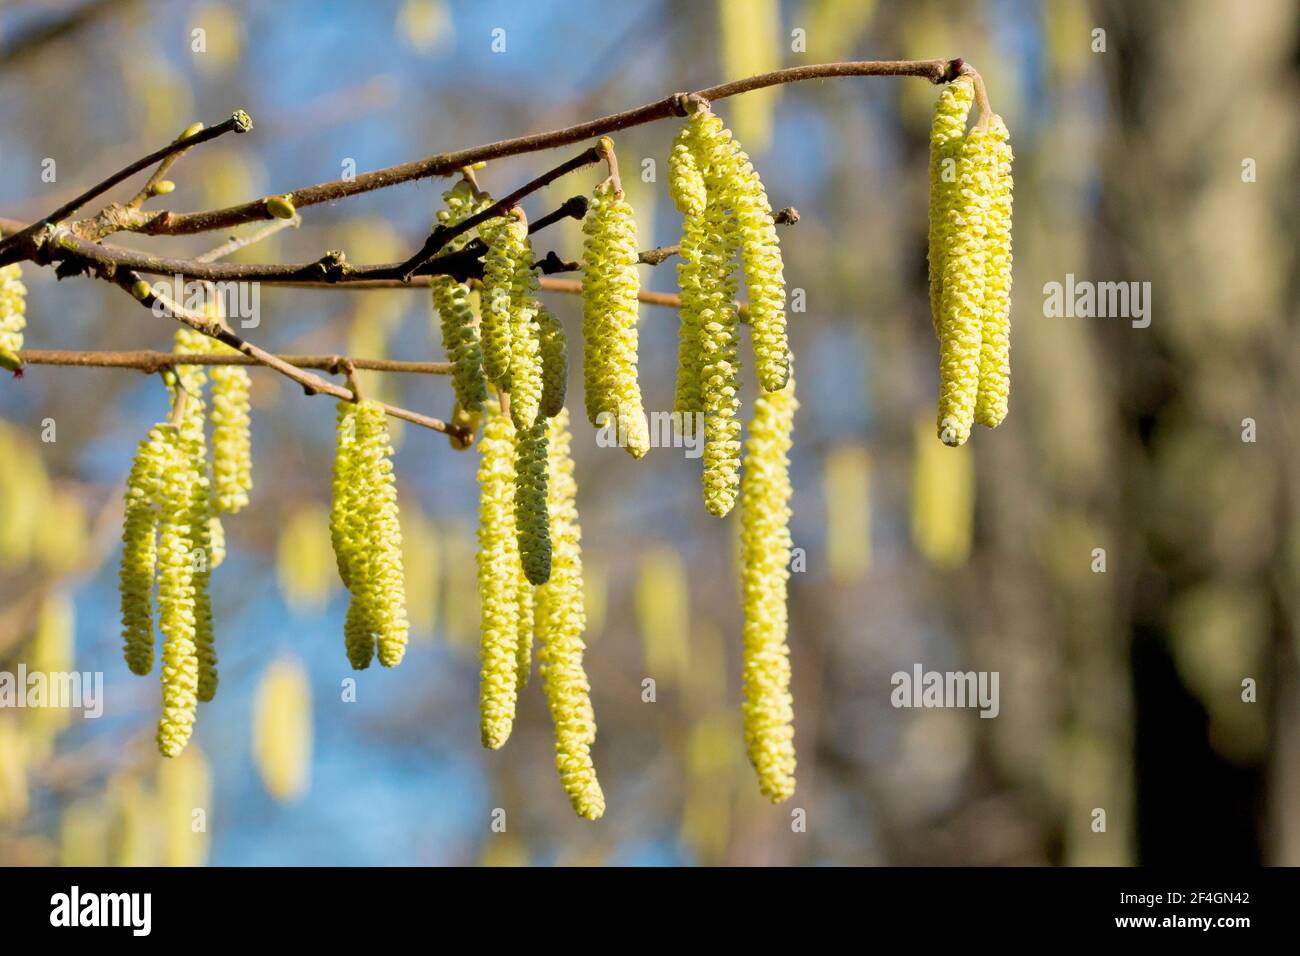 Hazel catkins (corylus avellana), also known as Cob Nut, close up showing several catkins hanging from a branch in spring sunshine. Stock Photo